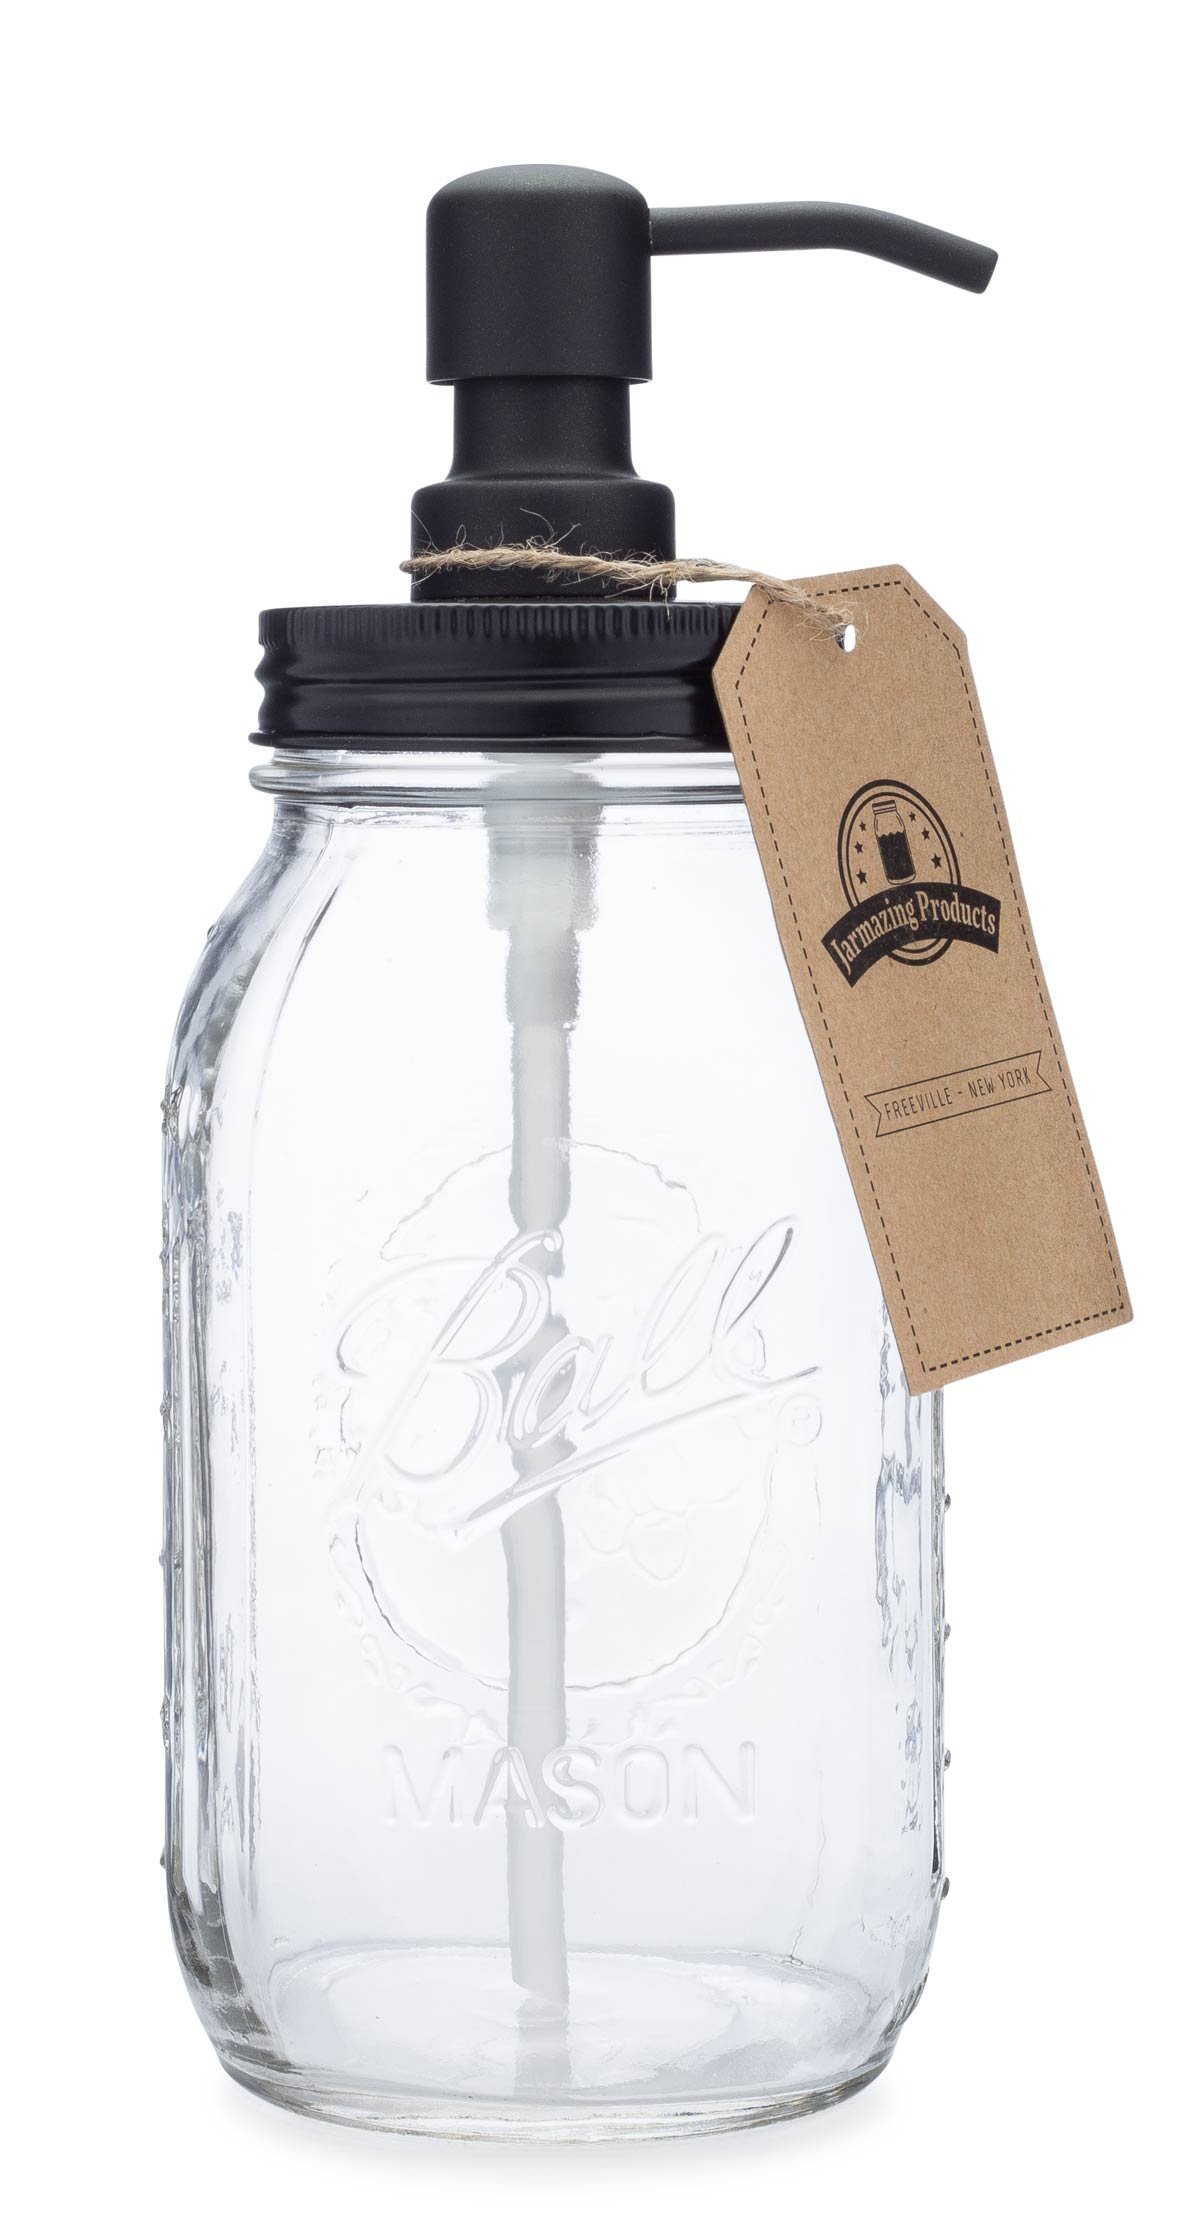 Book Cover Quart Size Mason Jar Soap and Lotion Dispenser - Black - by Jarmazing Products - Made from Rust-Proof Stainless Steel Semi-opaque Glass